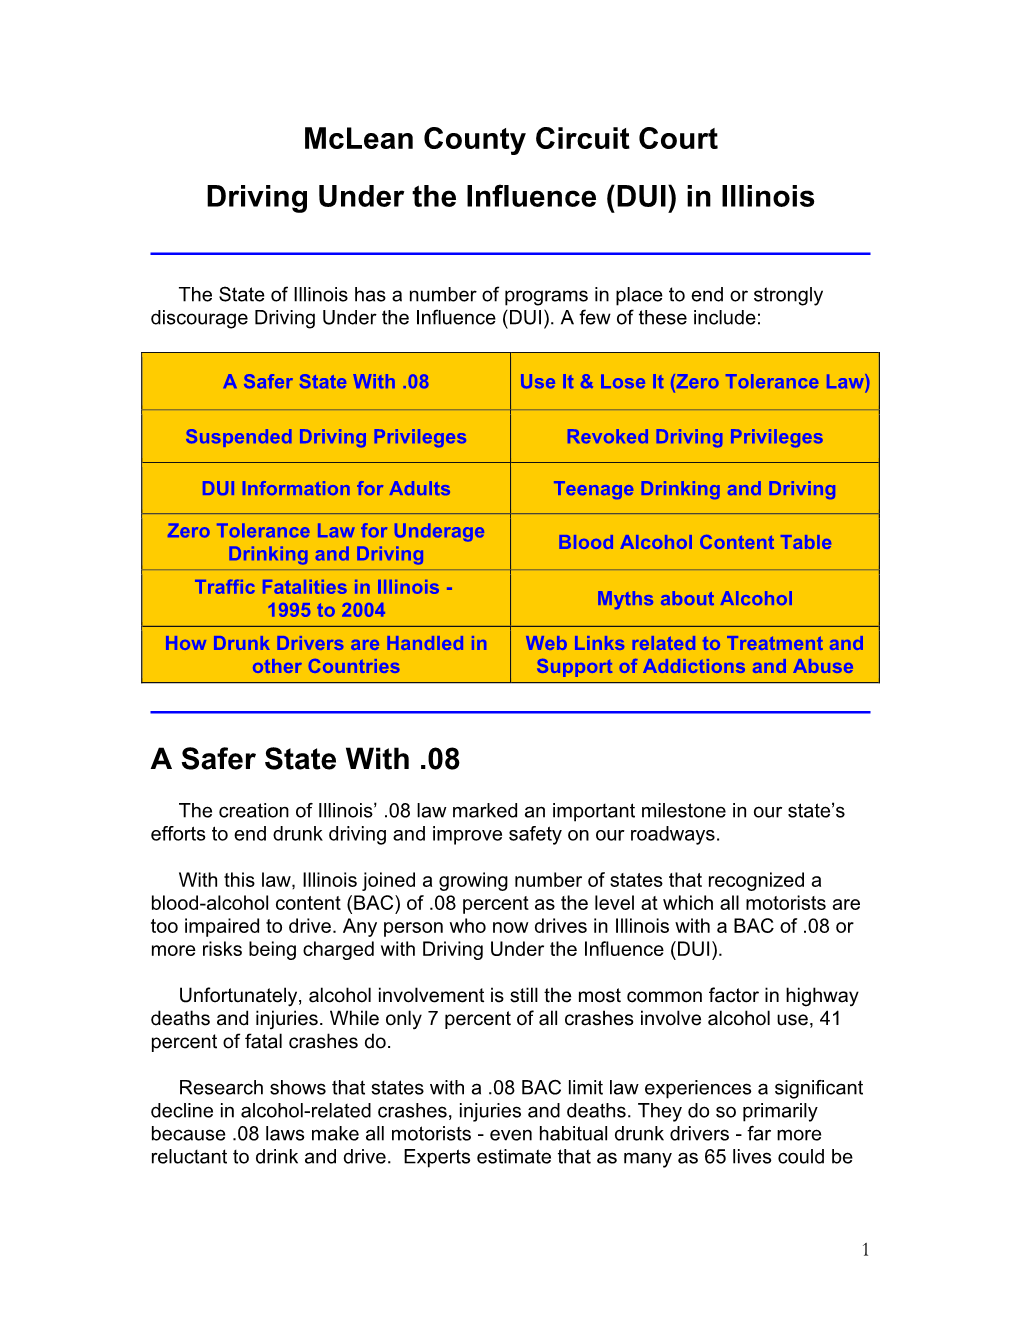 Mclean County Circuit Court Driving Under the Influence (DUI) in Illinois